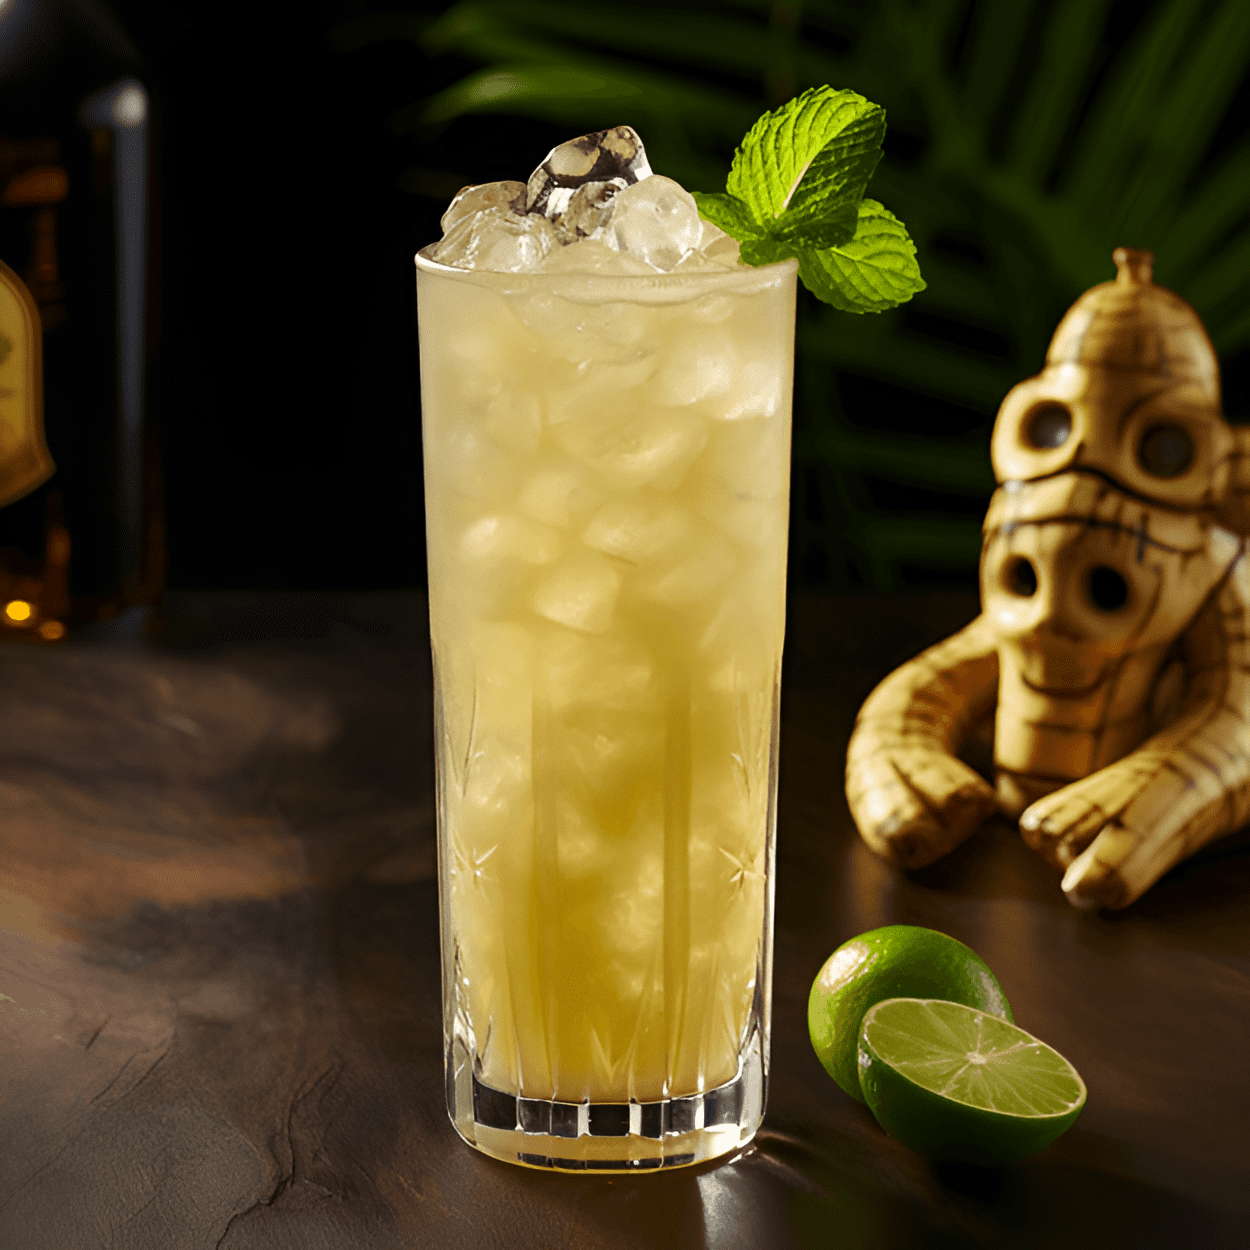 Slippery Monkey Cocktail Recipe - The Slippery Monkey is a sweet, fruity cocktail with a strong tropical vibe. It has a rich, creamy texture, thanks to the banana liqueur and cream. The rum adds a nice kick, balancing out the sweetness of the other ingredients. Overall, it's a smooth, refreshing drink with a delightful banana flavor.